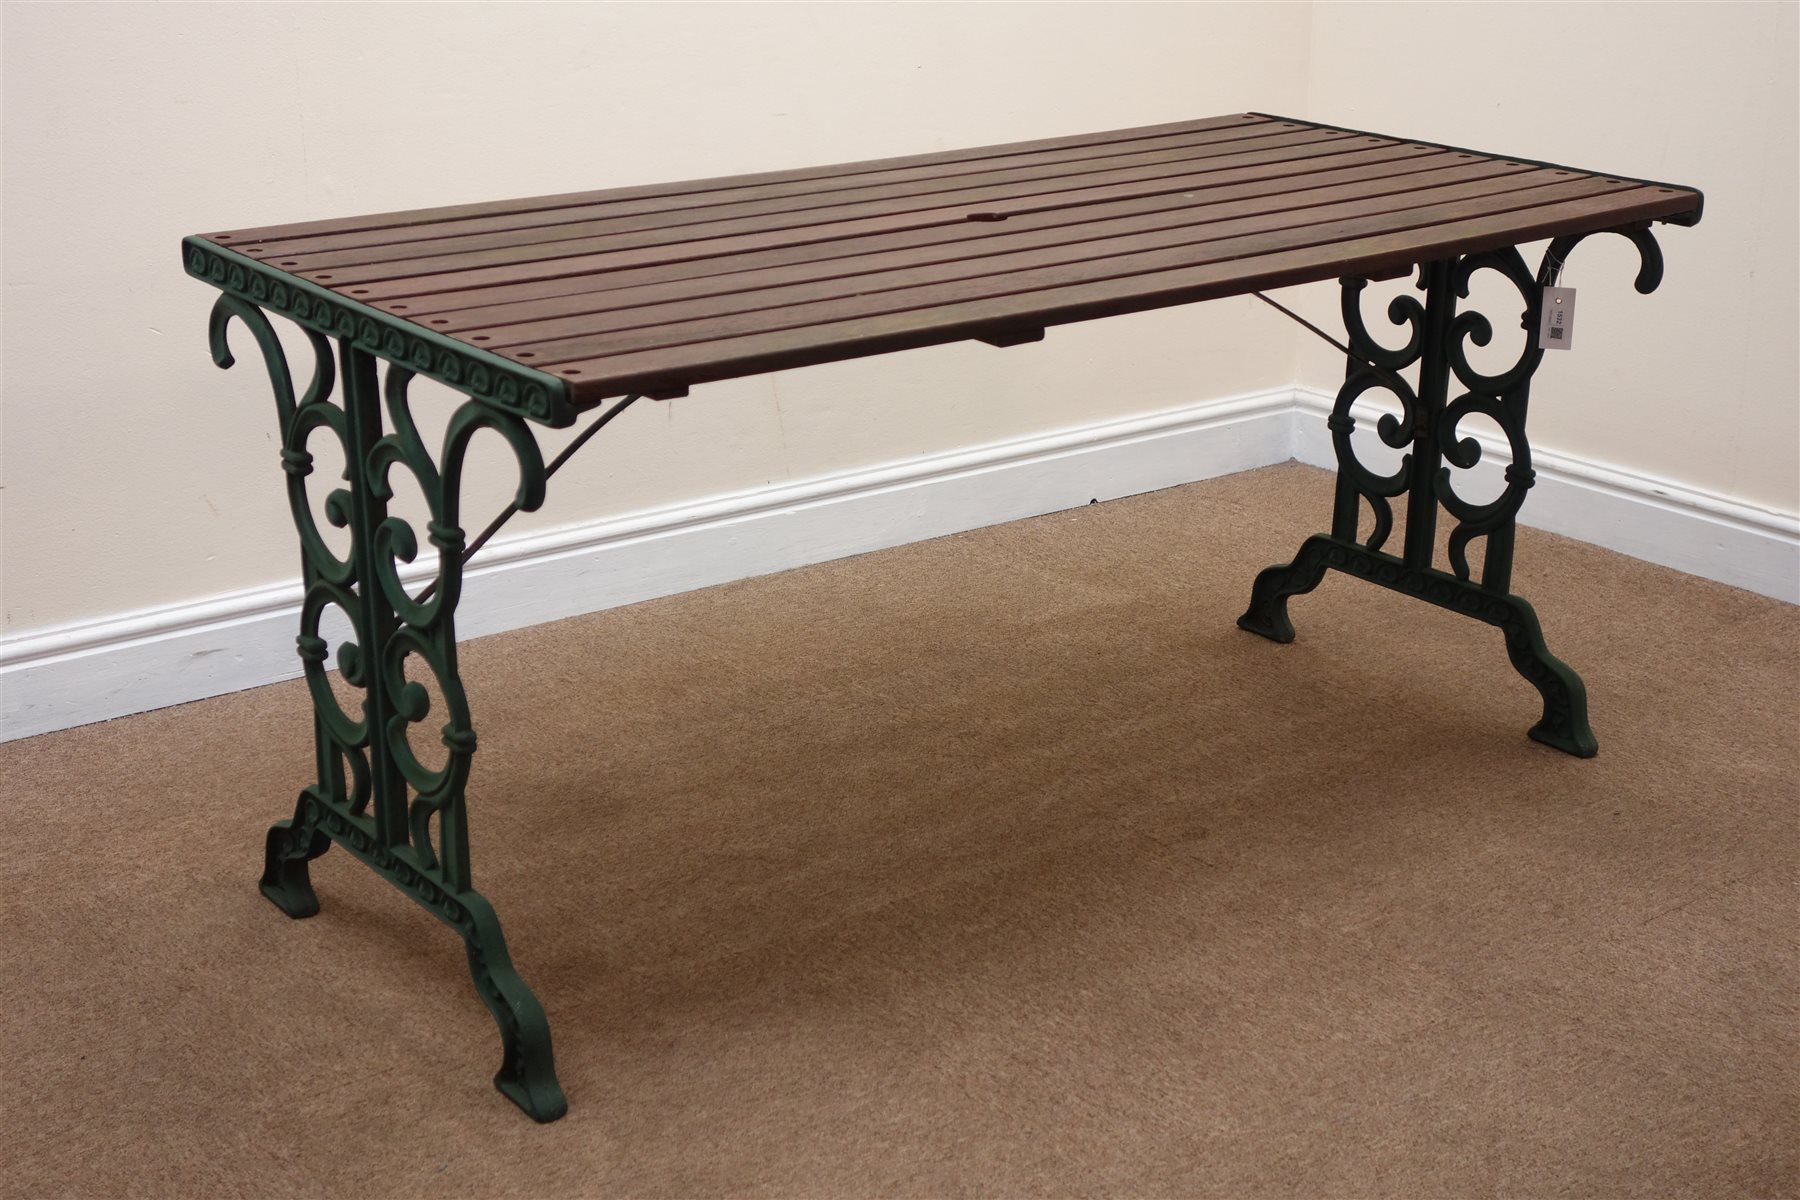 Cast Iron And Wood Slatted Rectangular Garden Table W141cm H66cm D68cm A Matching Two Seat Bench W130cm And Pair Armchairs W63cm Mao030320 The Furnishings Sale Furniture Affordable Art Interiors